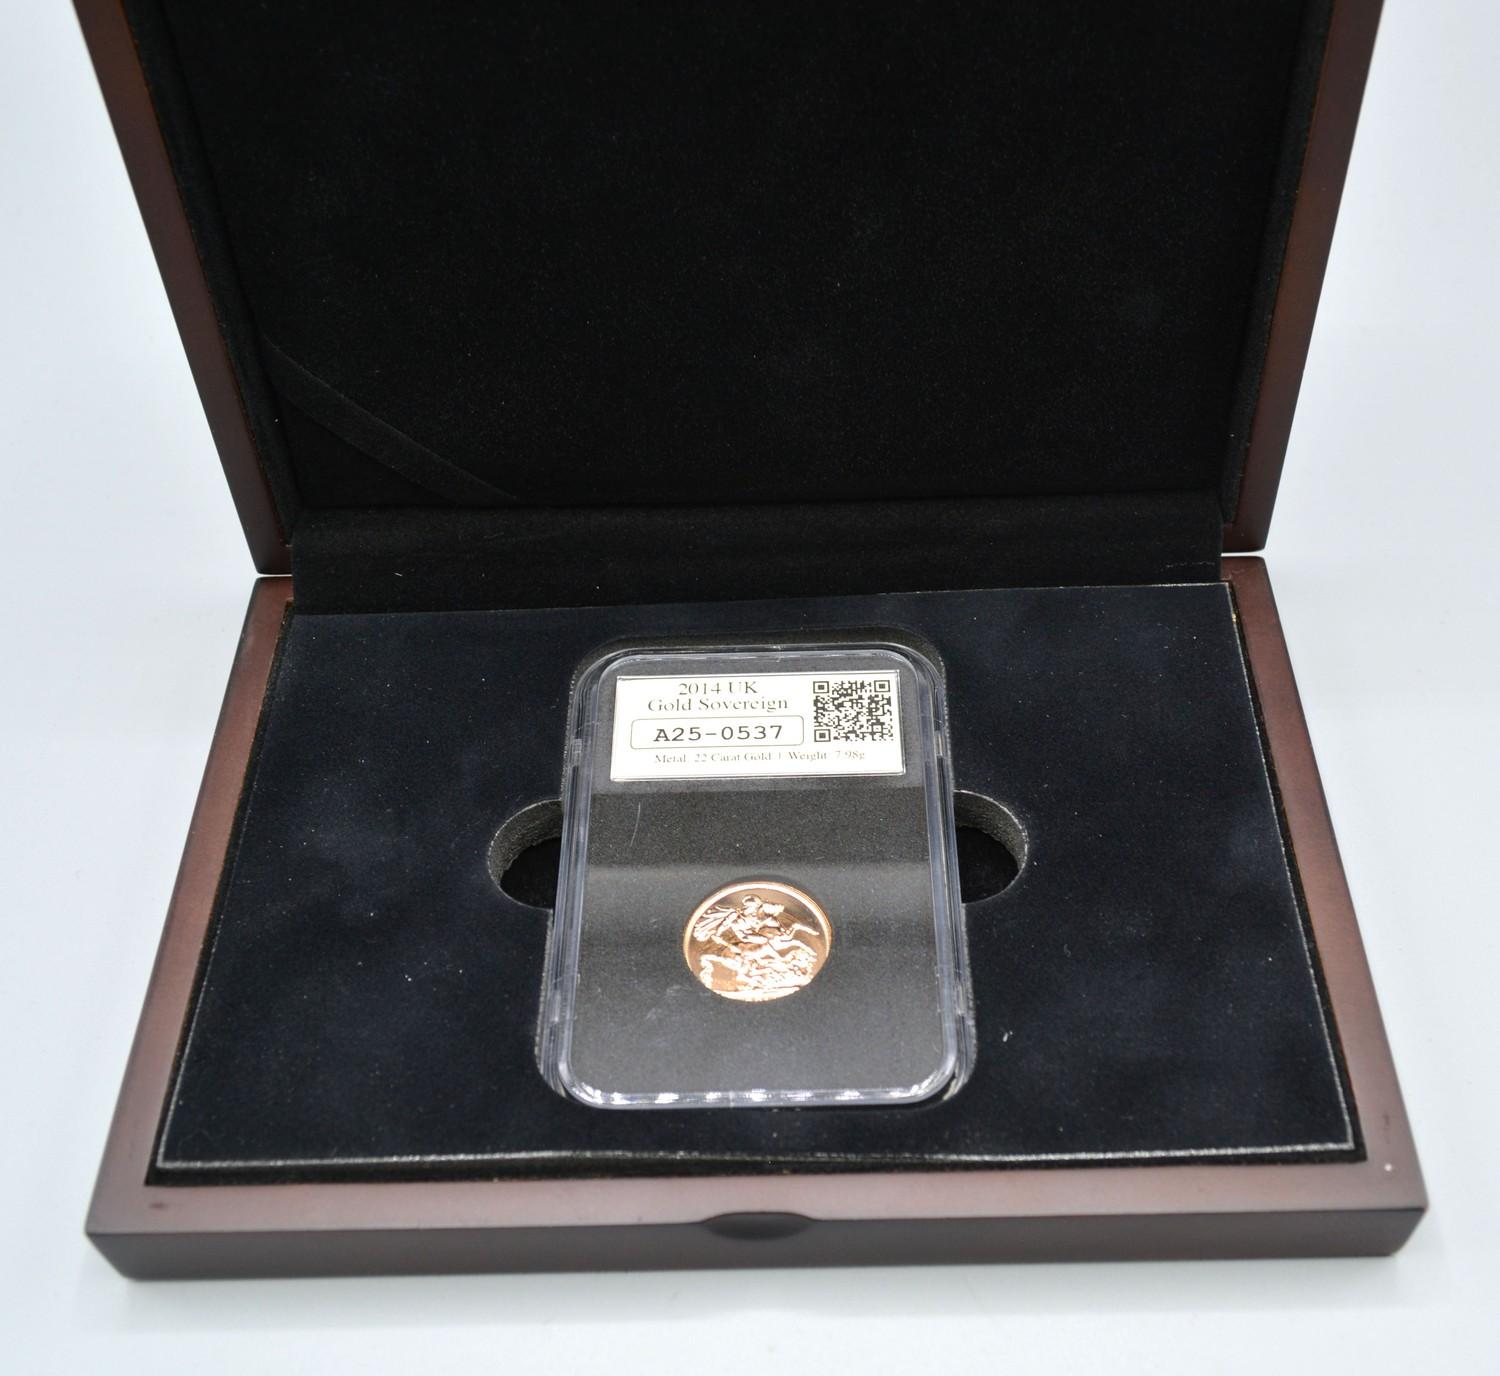 A Full Gold Sovereign dated 2014